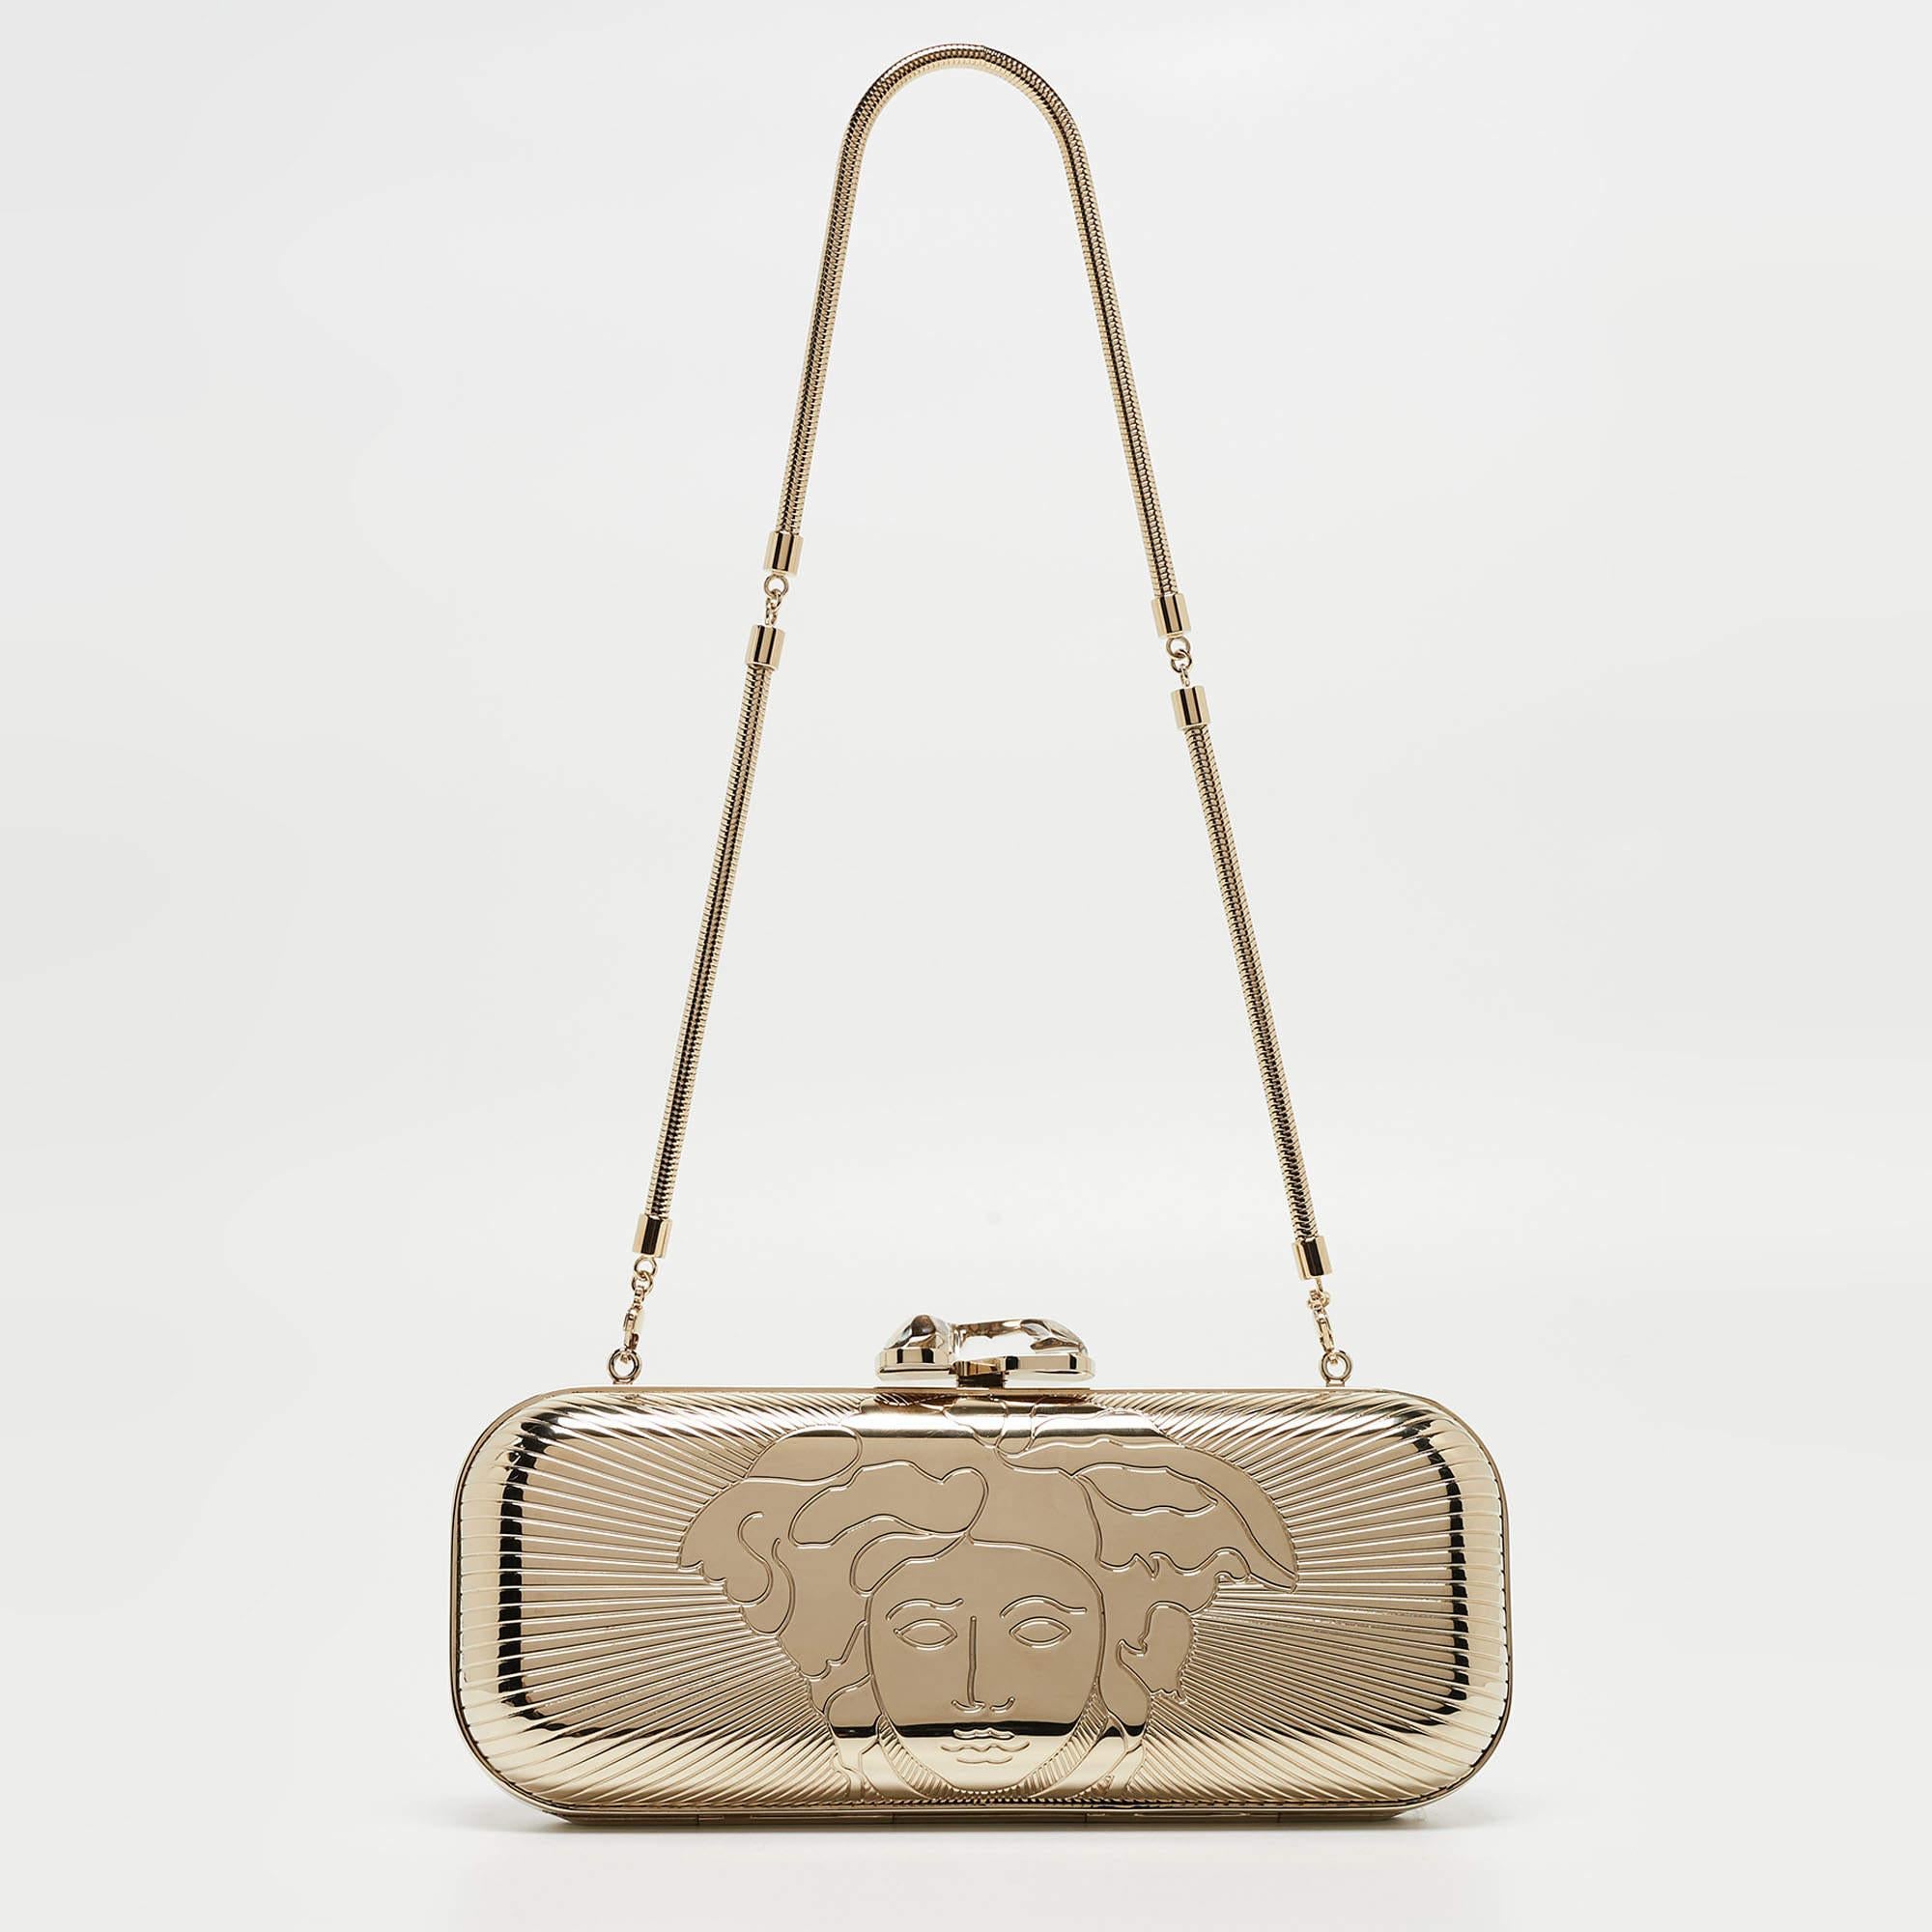 From the house of Versace comes this gorgeous clutch that will perfectly complement all your evening outfits. It has been crafted from gold metal and styled with a Medusa emblem that opens to a suede interior. This clutch wins with its structured